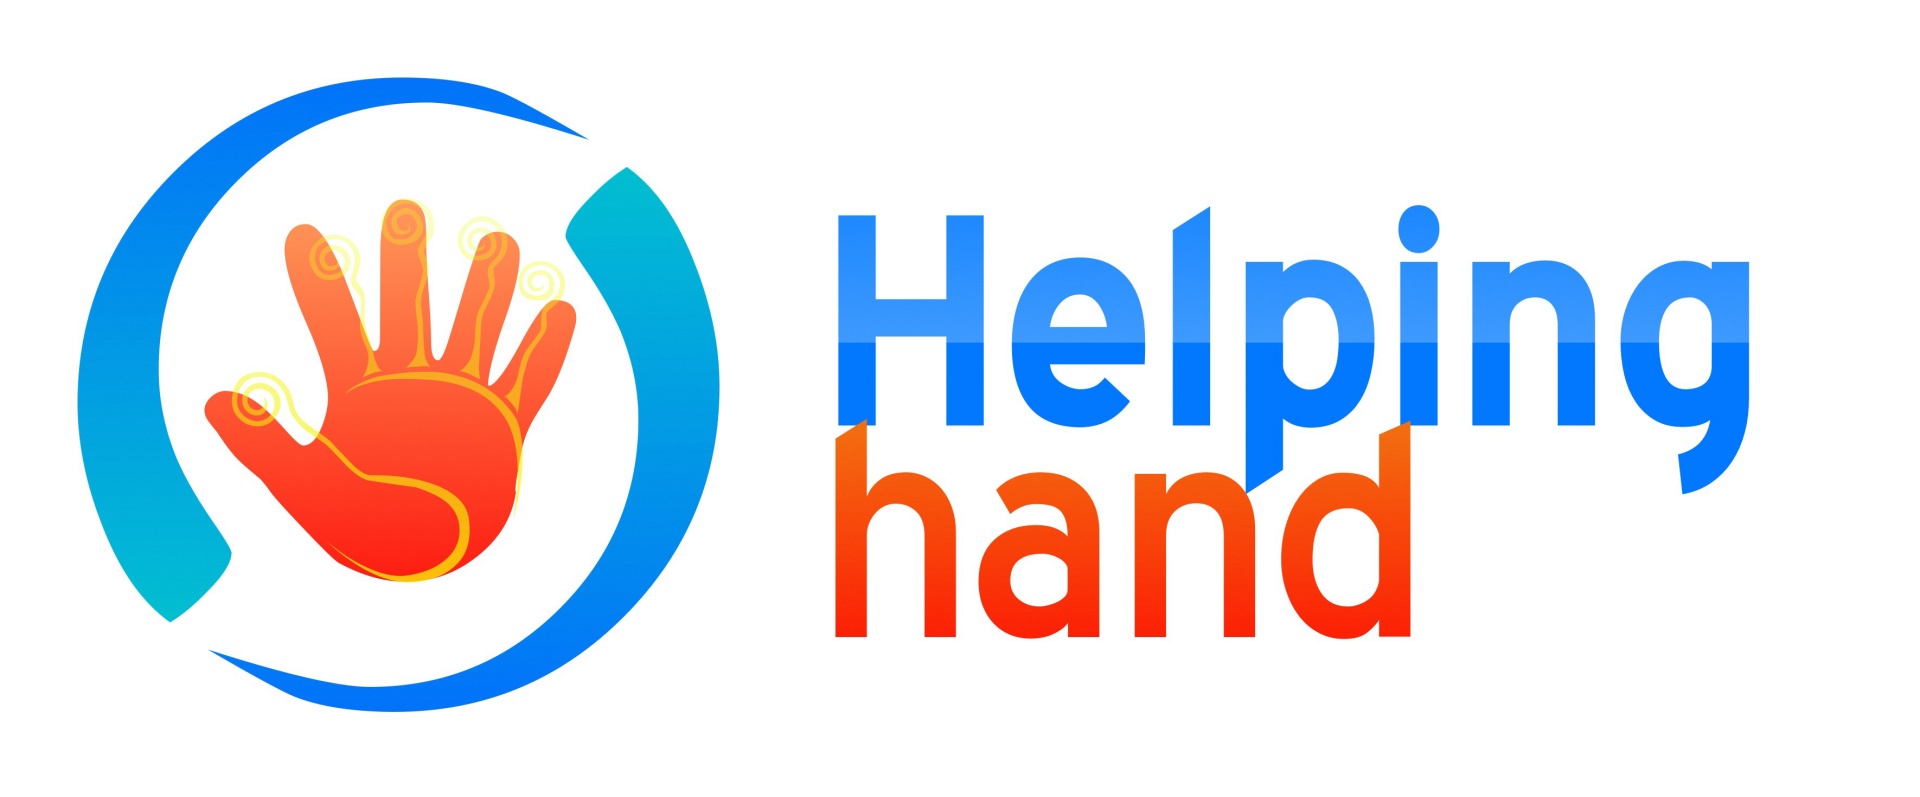 free clipart images helping hands - photo #32